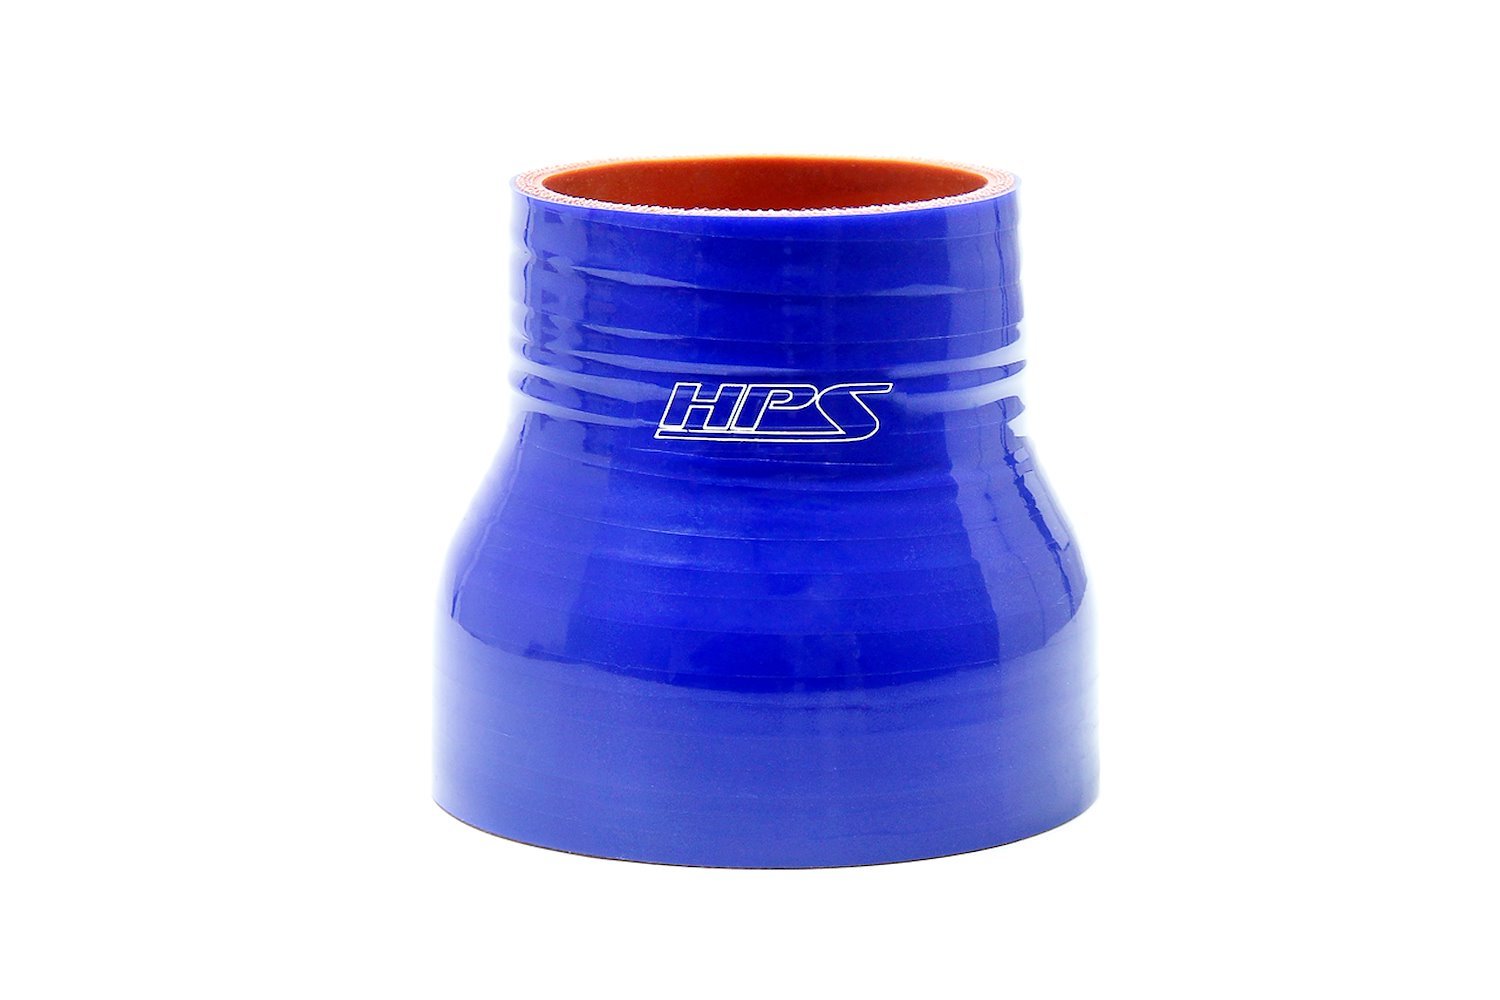 HTSR-175-250-BLUE Silicone Reducer Hose, High-Temp 4-Ply Reinforced, 1-3/4 in. - 2-1/2 in. ID, 3 in. Long, Blue